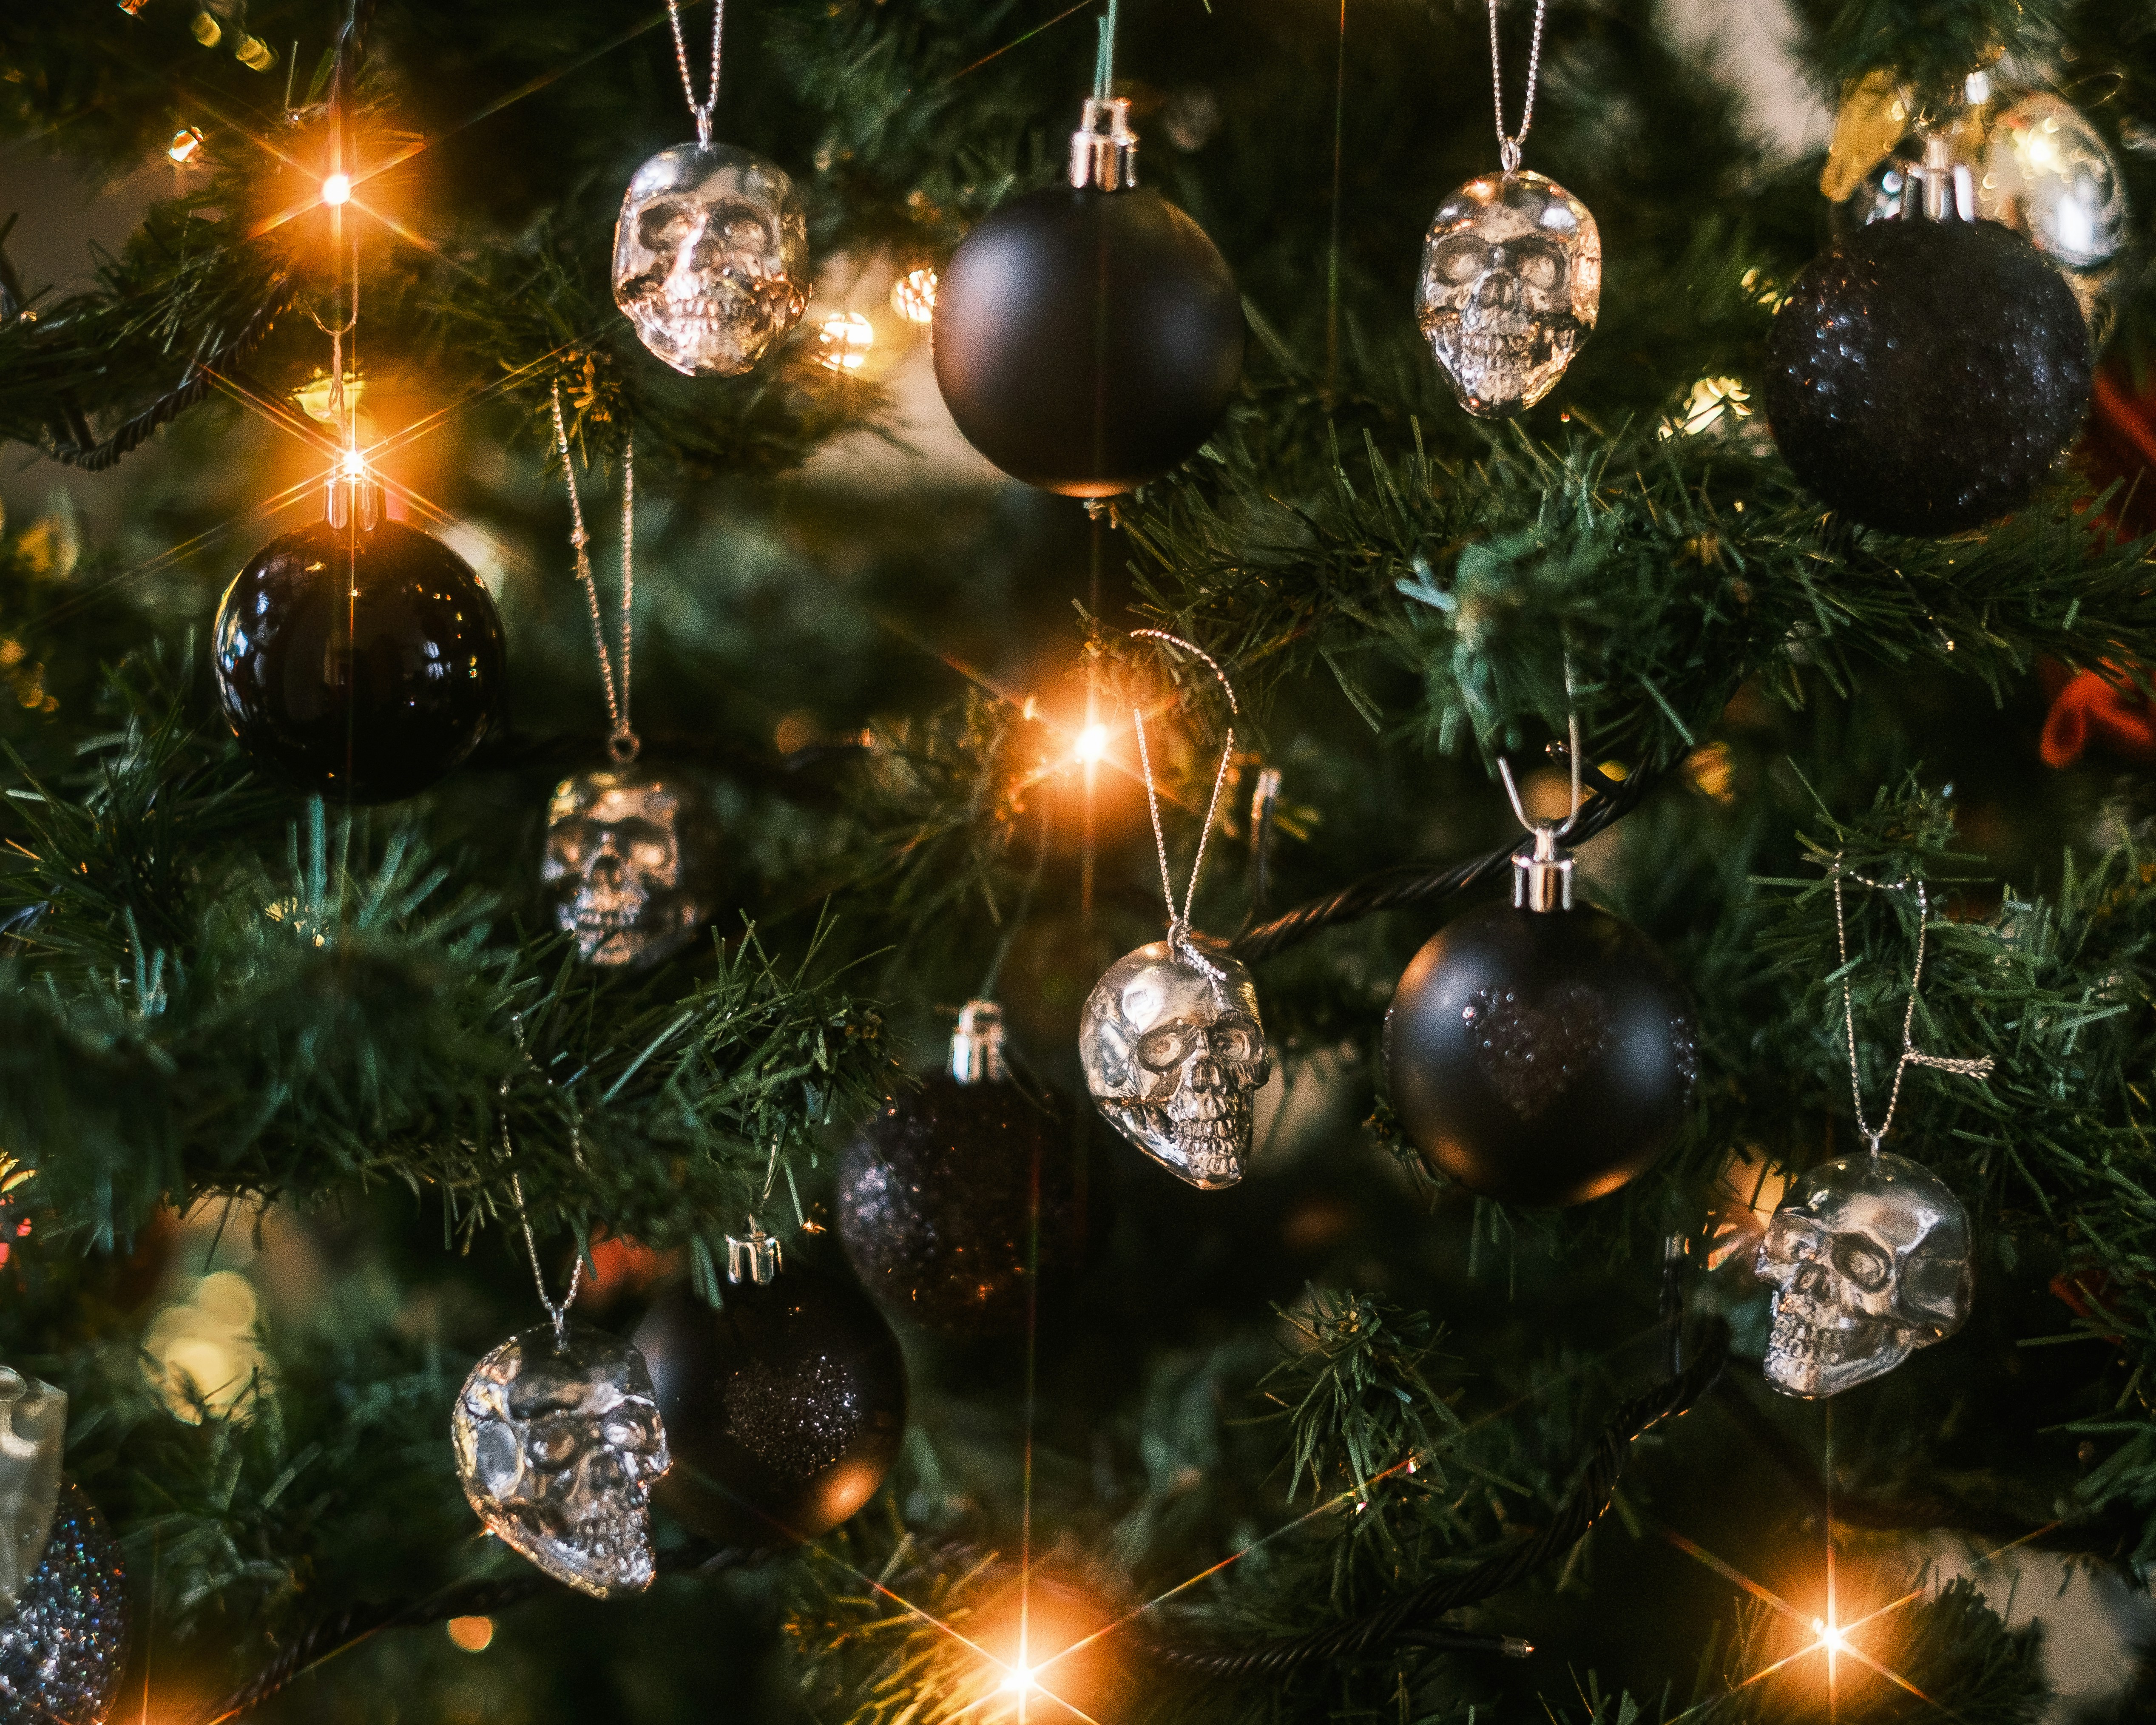 Choose from a curated selection of Christmas tree photos. Always free on Unsplash.